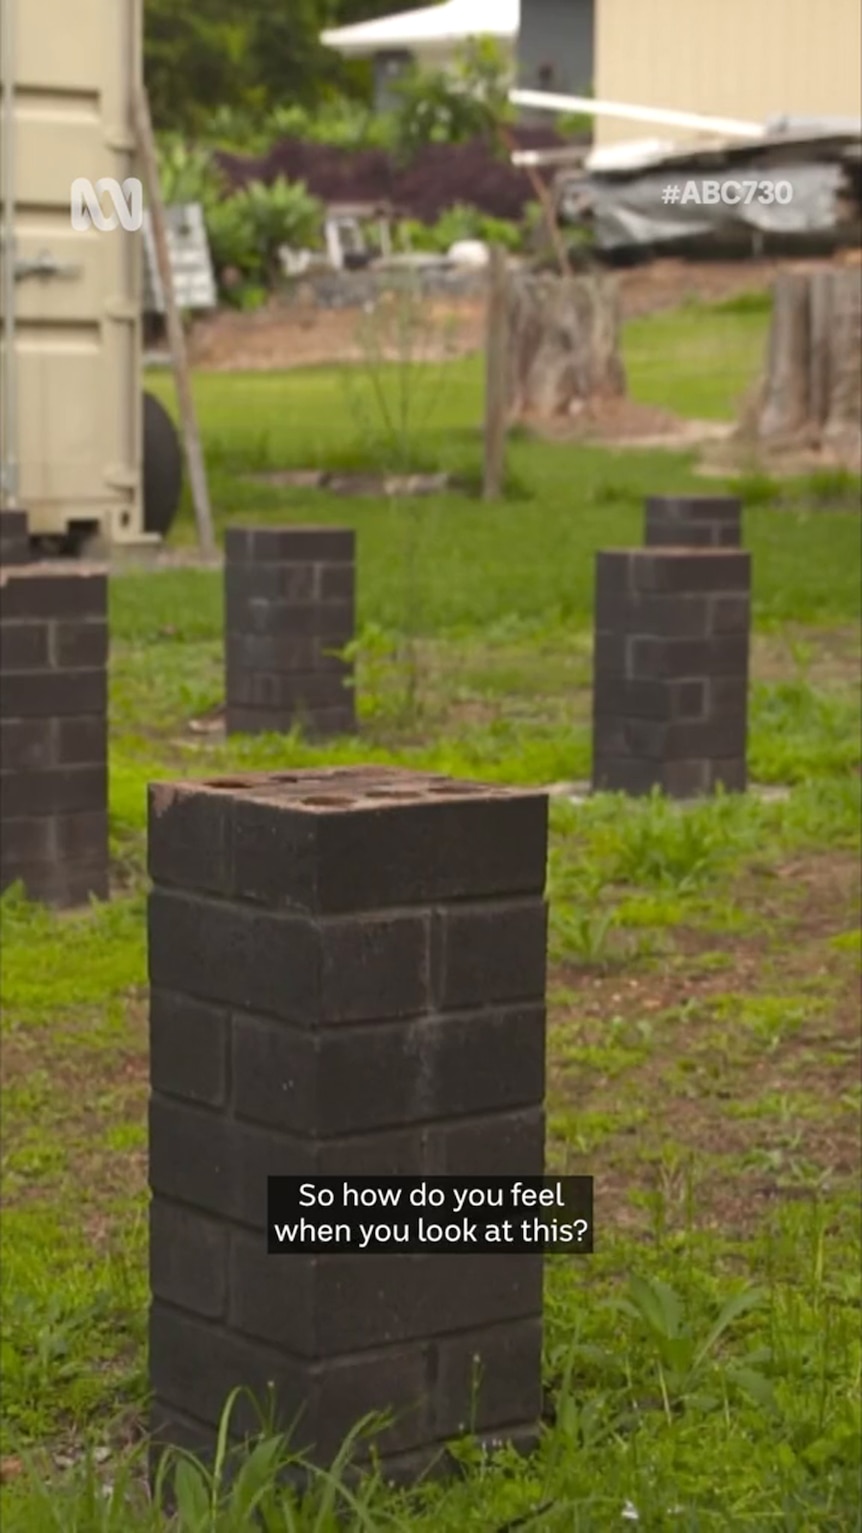 Stumps made from bricks sit atop a green grassy lawn with some patches of exposed earth also visible